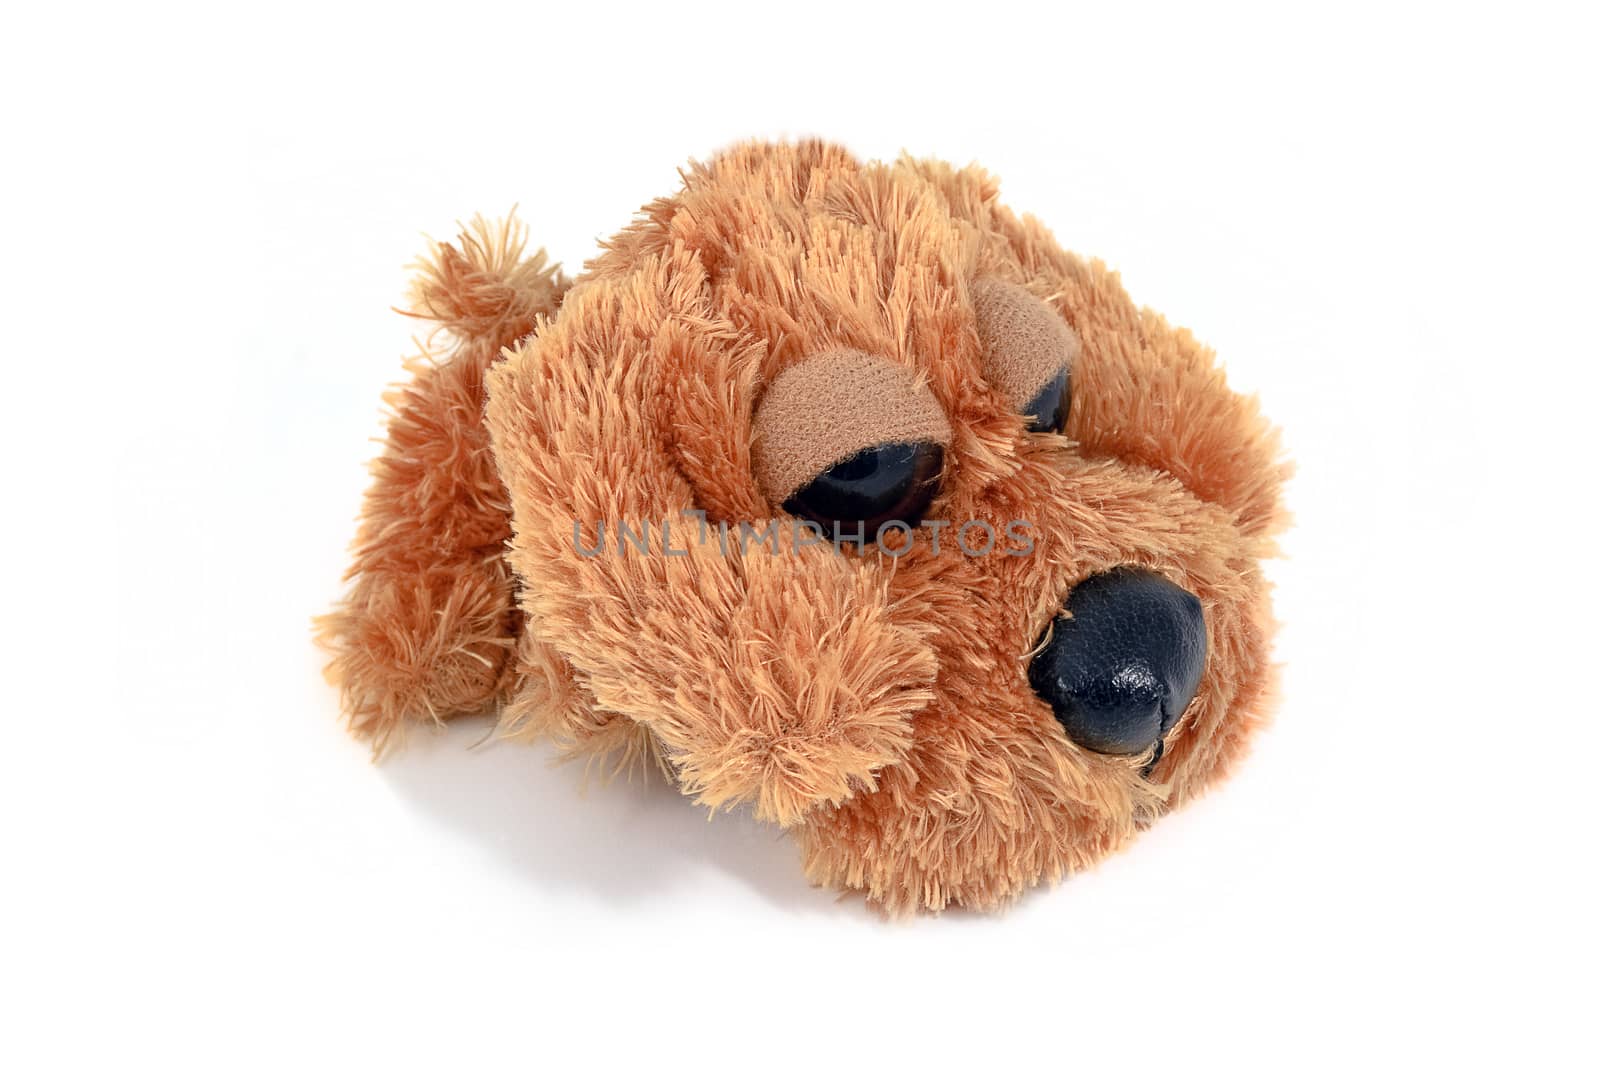 Fuzzy brown puppy toy, isolated on white background